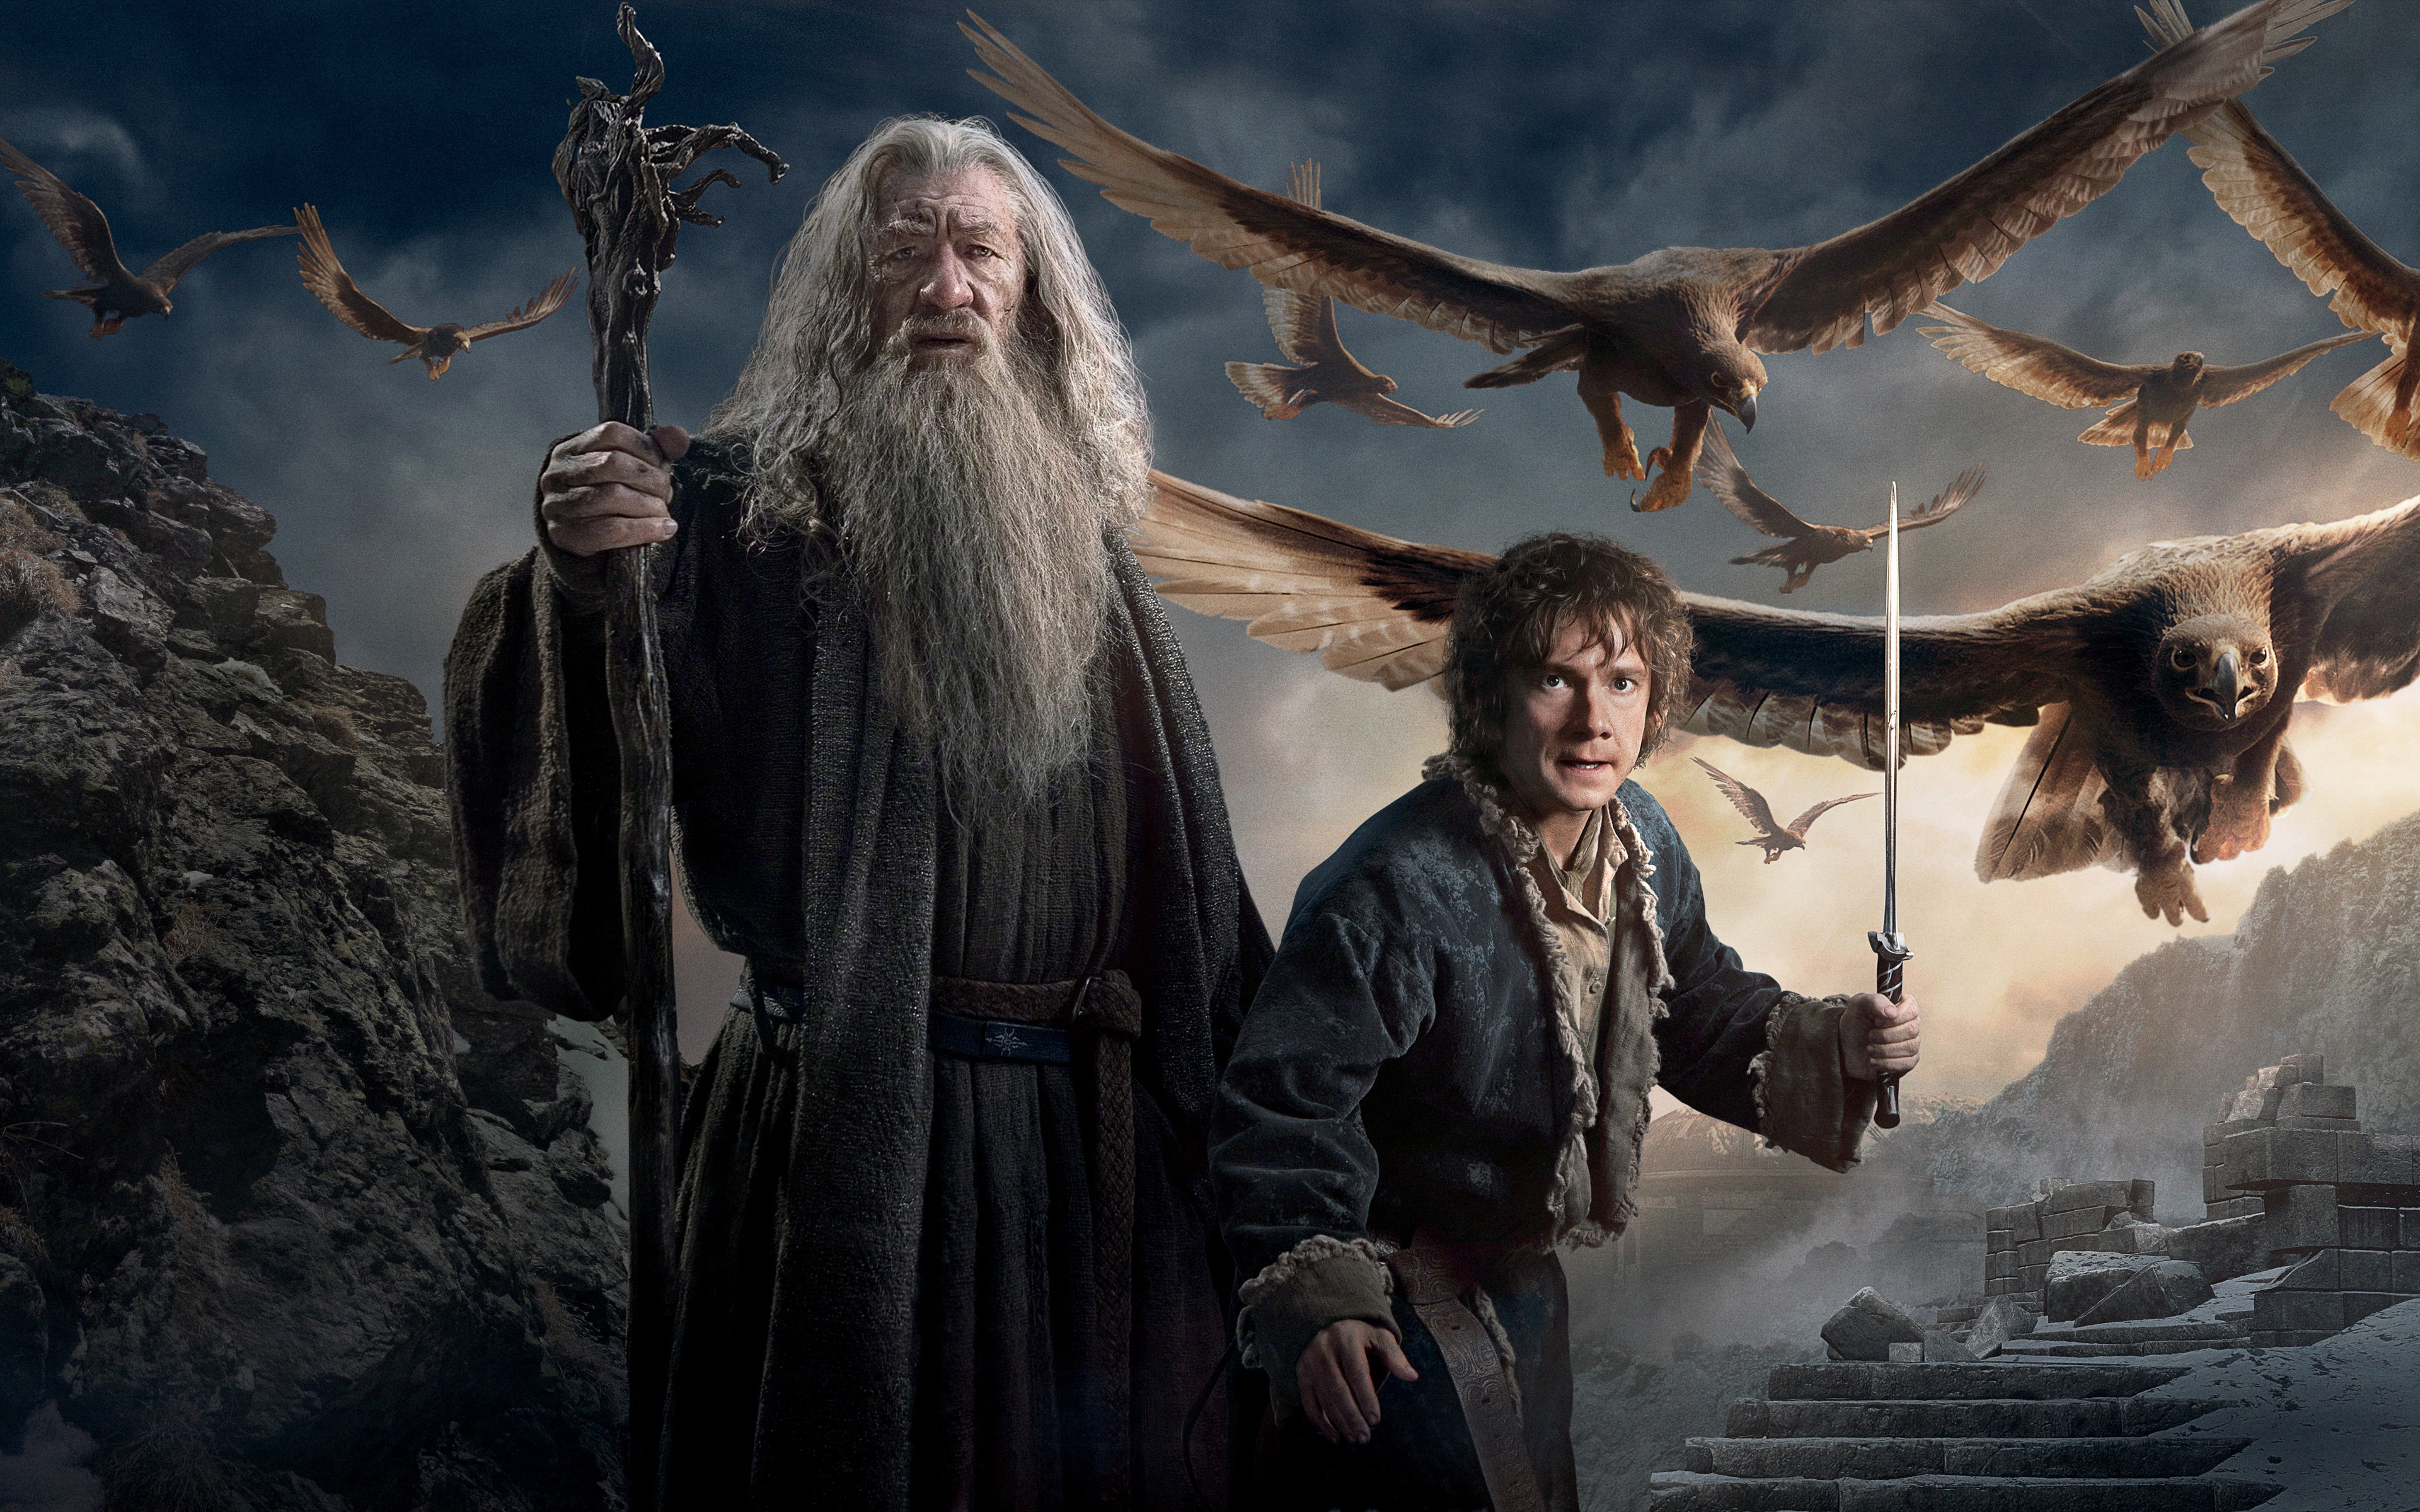 The Hobbit The Battle Of The Five Armies for 3840 x 2400 Widescreen resolution